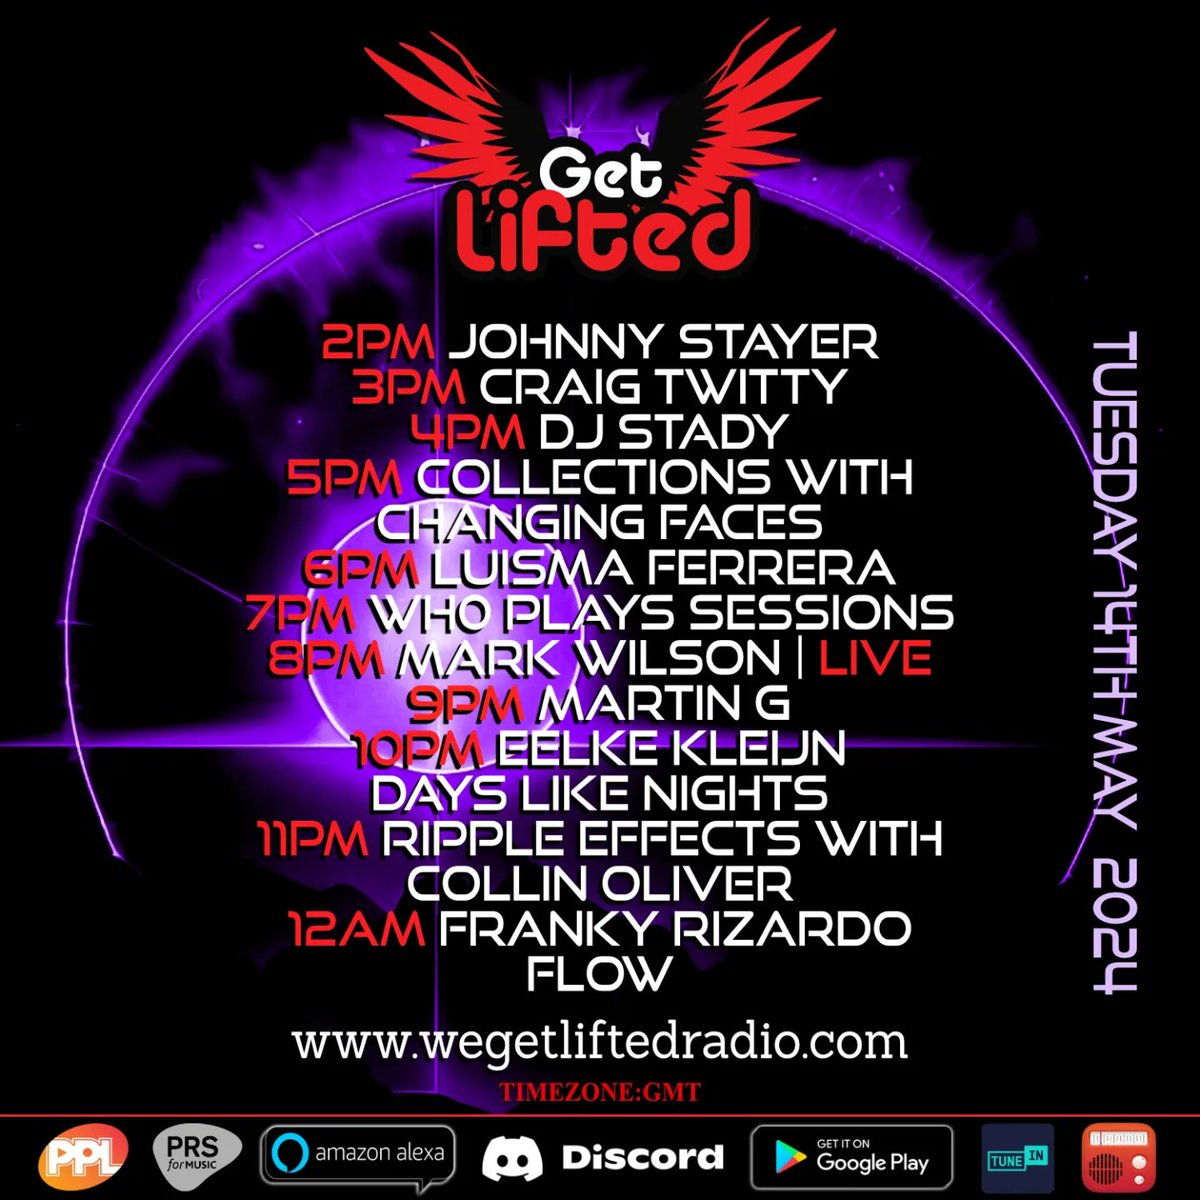 Take us with you, and listen to the best sounds 🎶
We Get Lifted Radio is on your fav apps.

wegetliftedradio.com mixcloud.com/live/wegetlift… 

#housemusic #housemusiclovers #djset 
#melodichouse #afrohouse